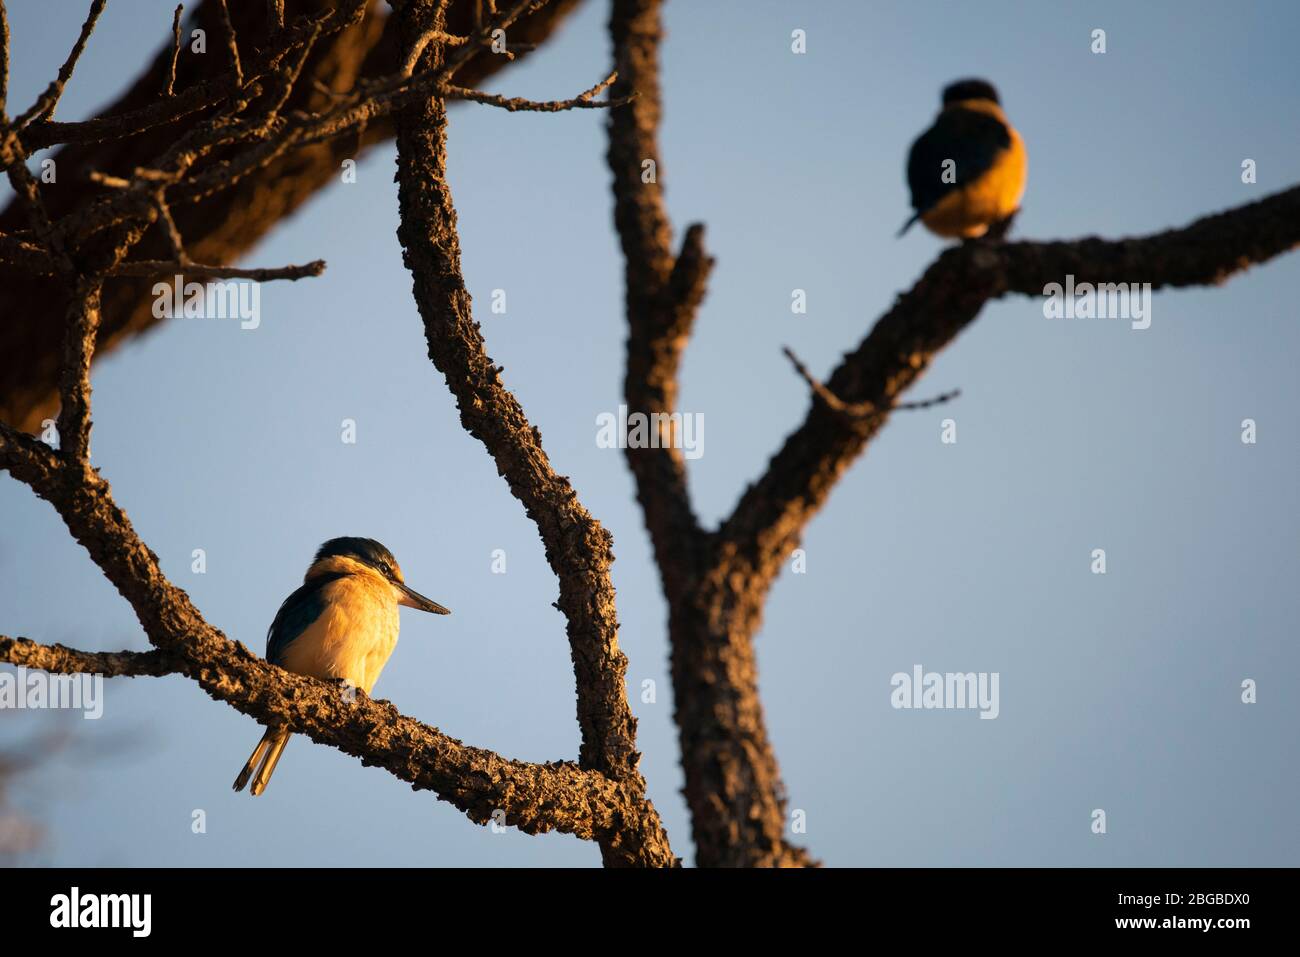 kingfishers perched on tree branches at sunrise. Stock Photo